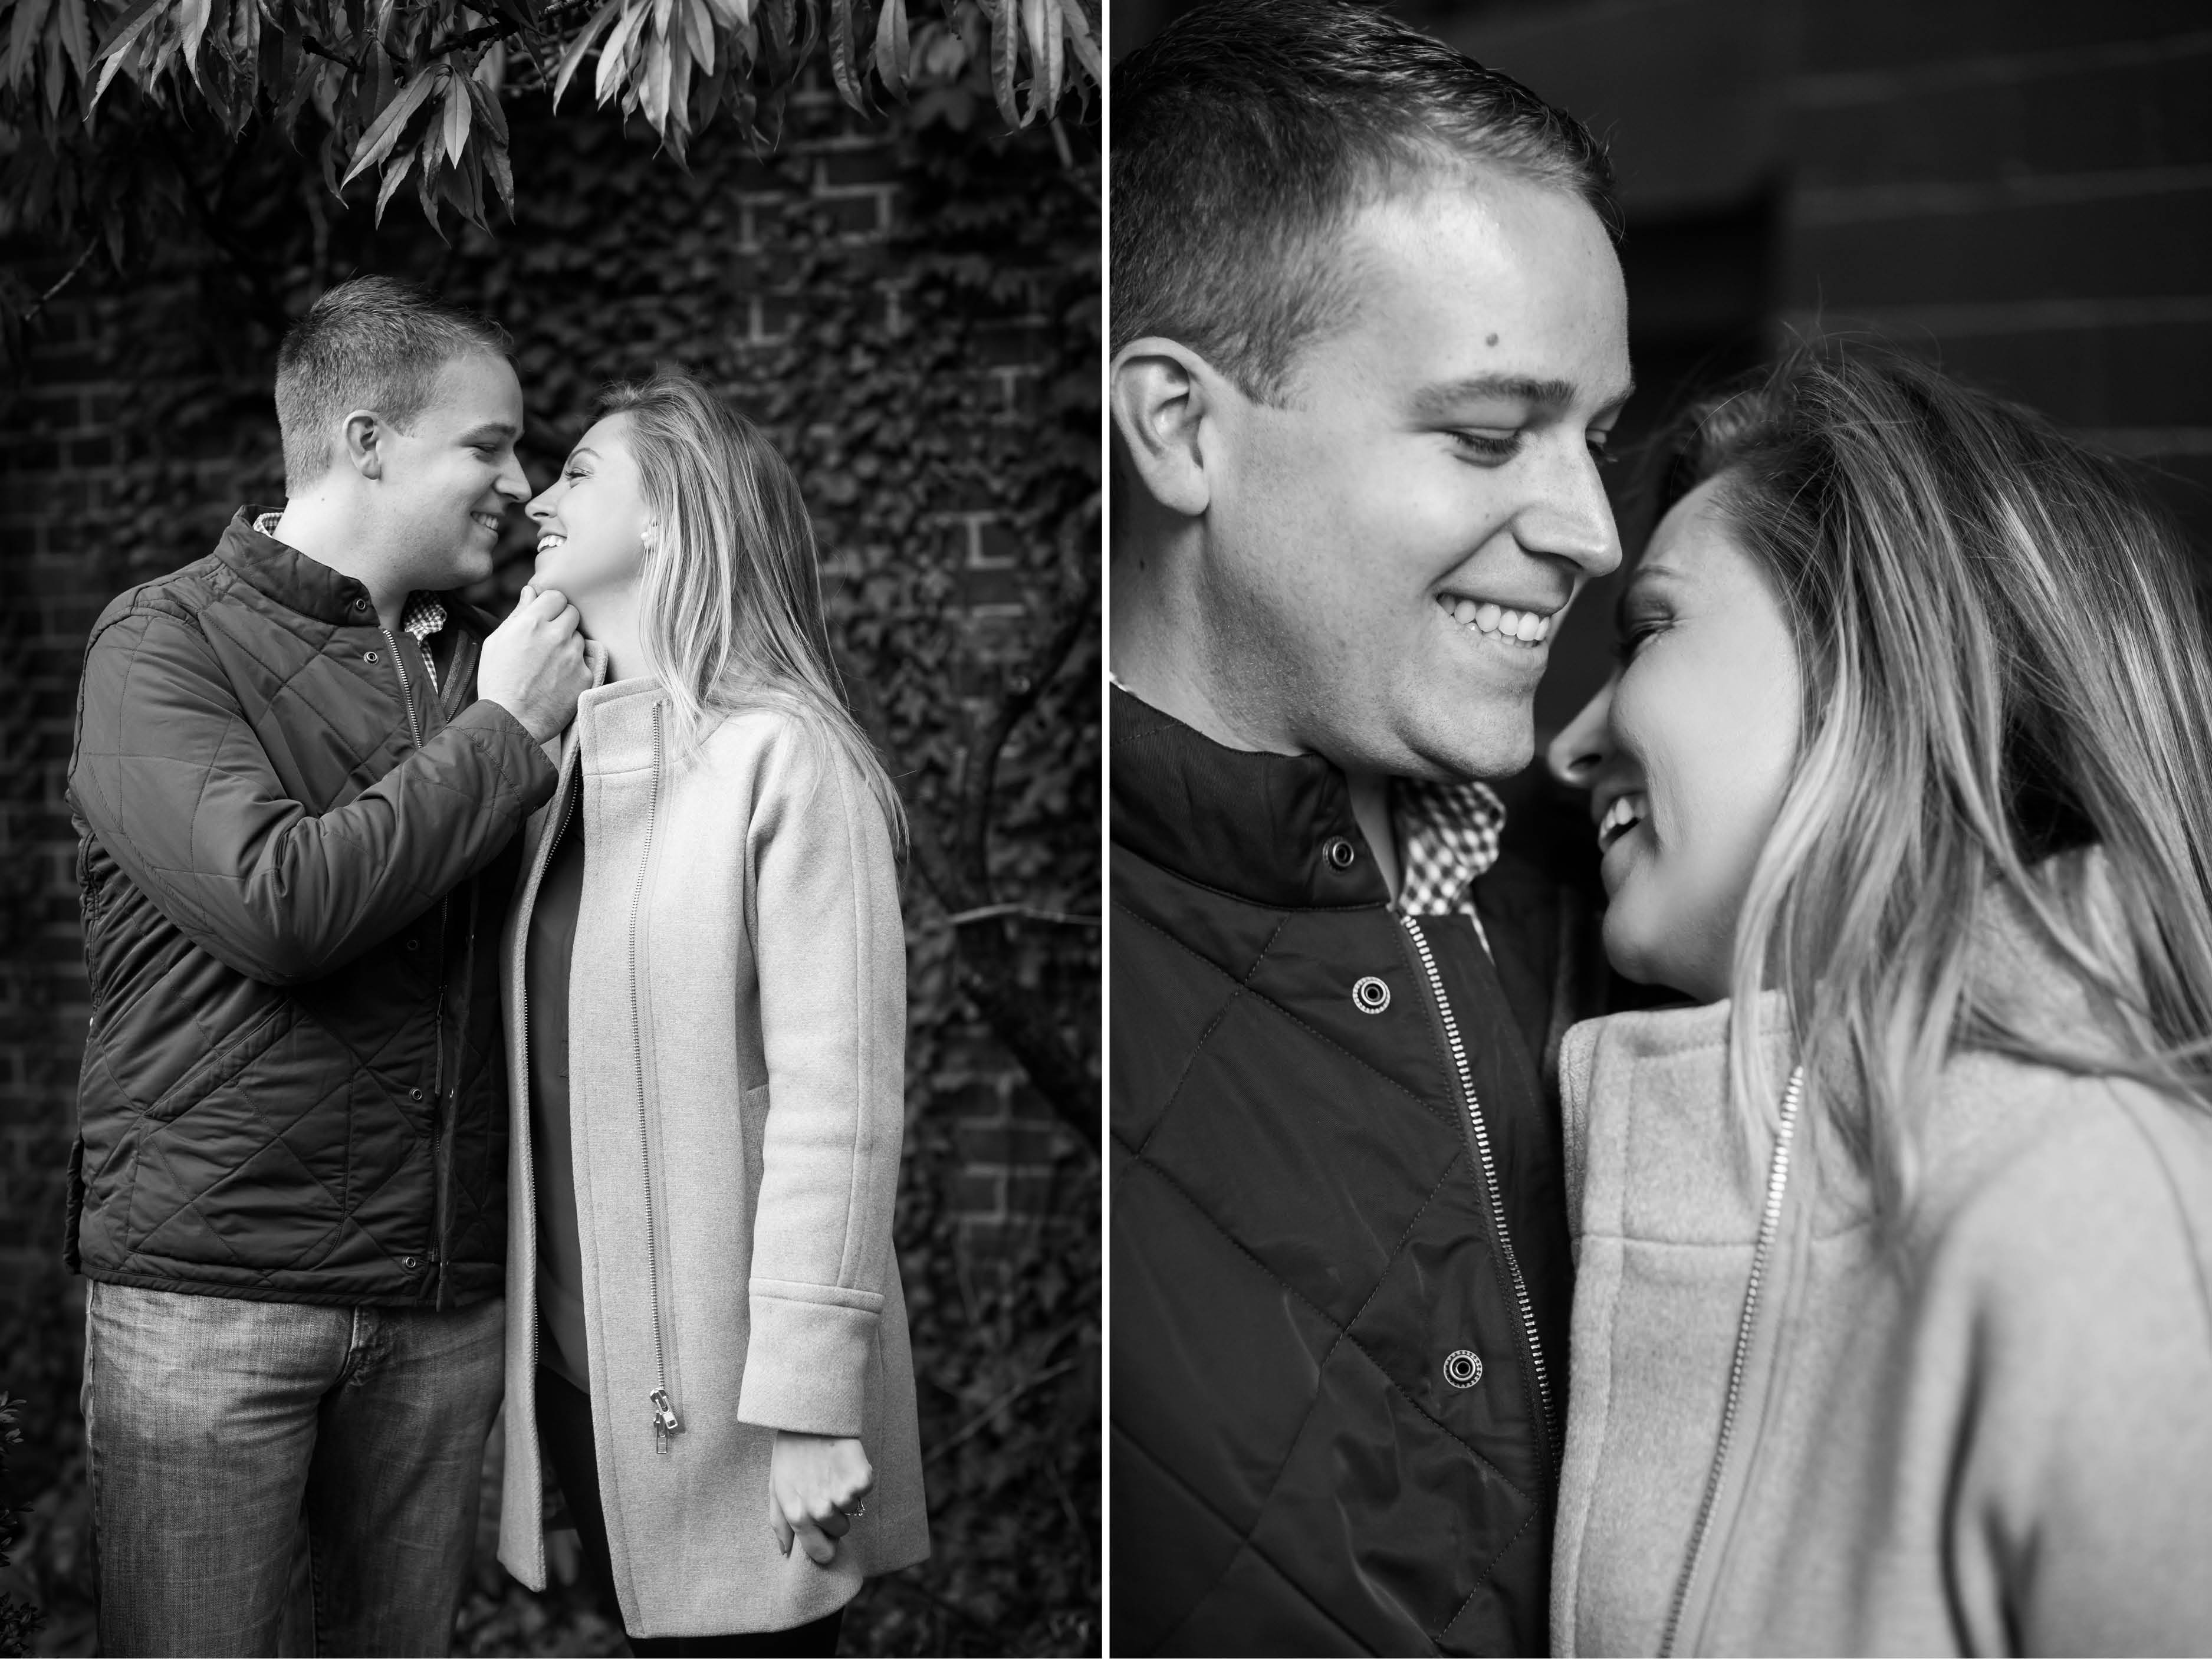 Emma_cleary_photography Engagement shoot west vilage5